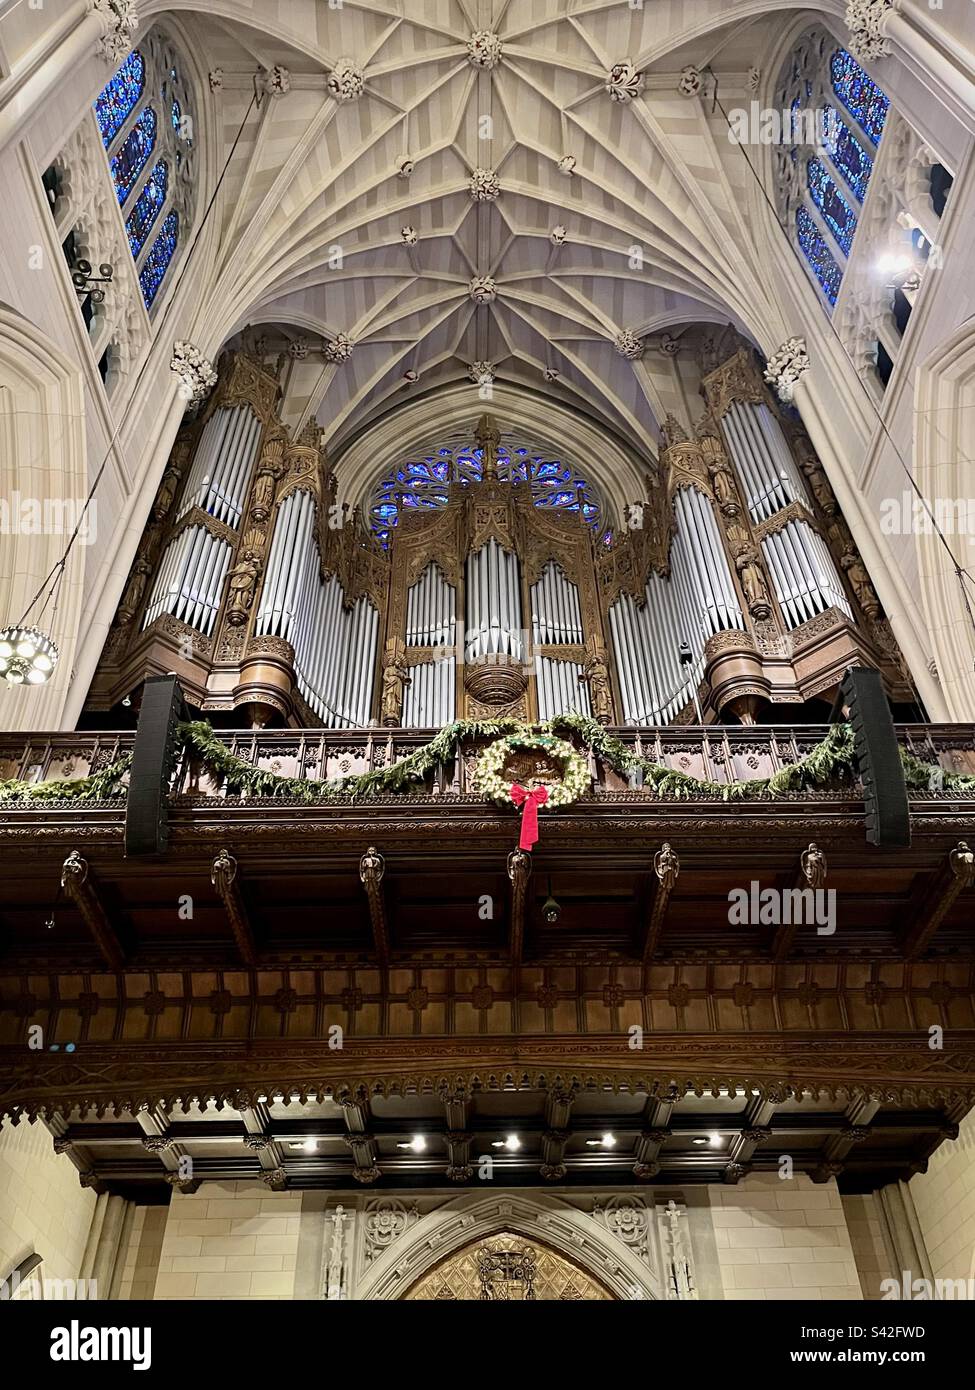 Great organ of St. Patrick's Cathedral in New York York. Photo taken in New York in December 2022 Stock Photo